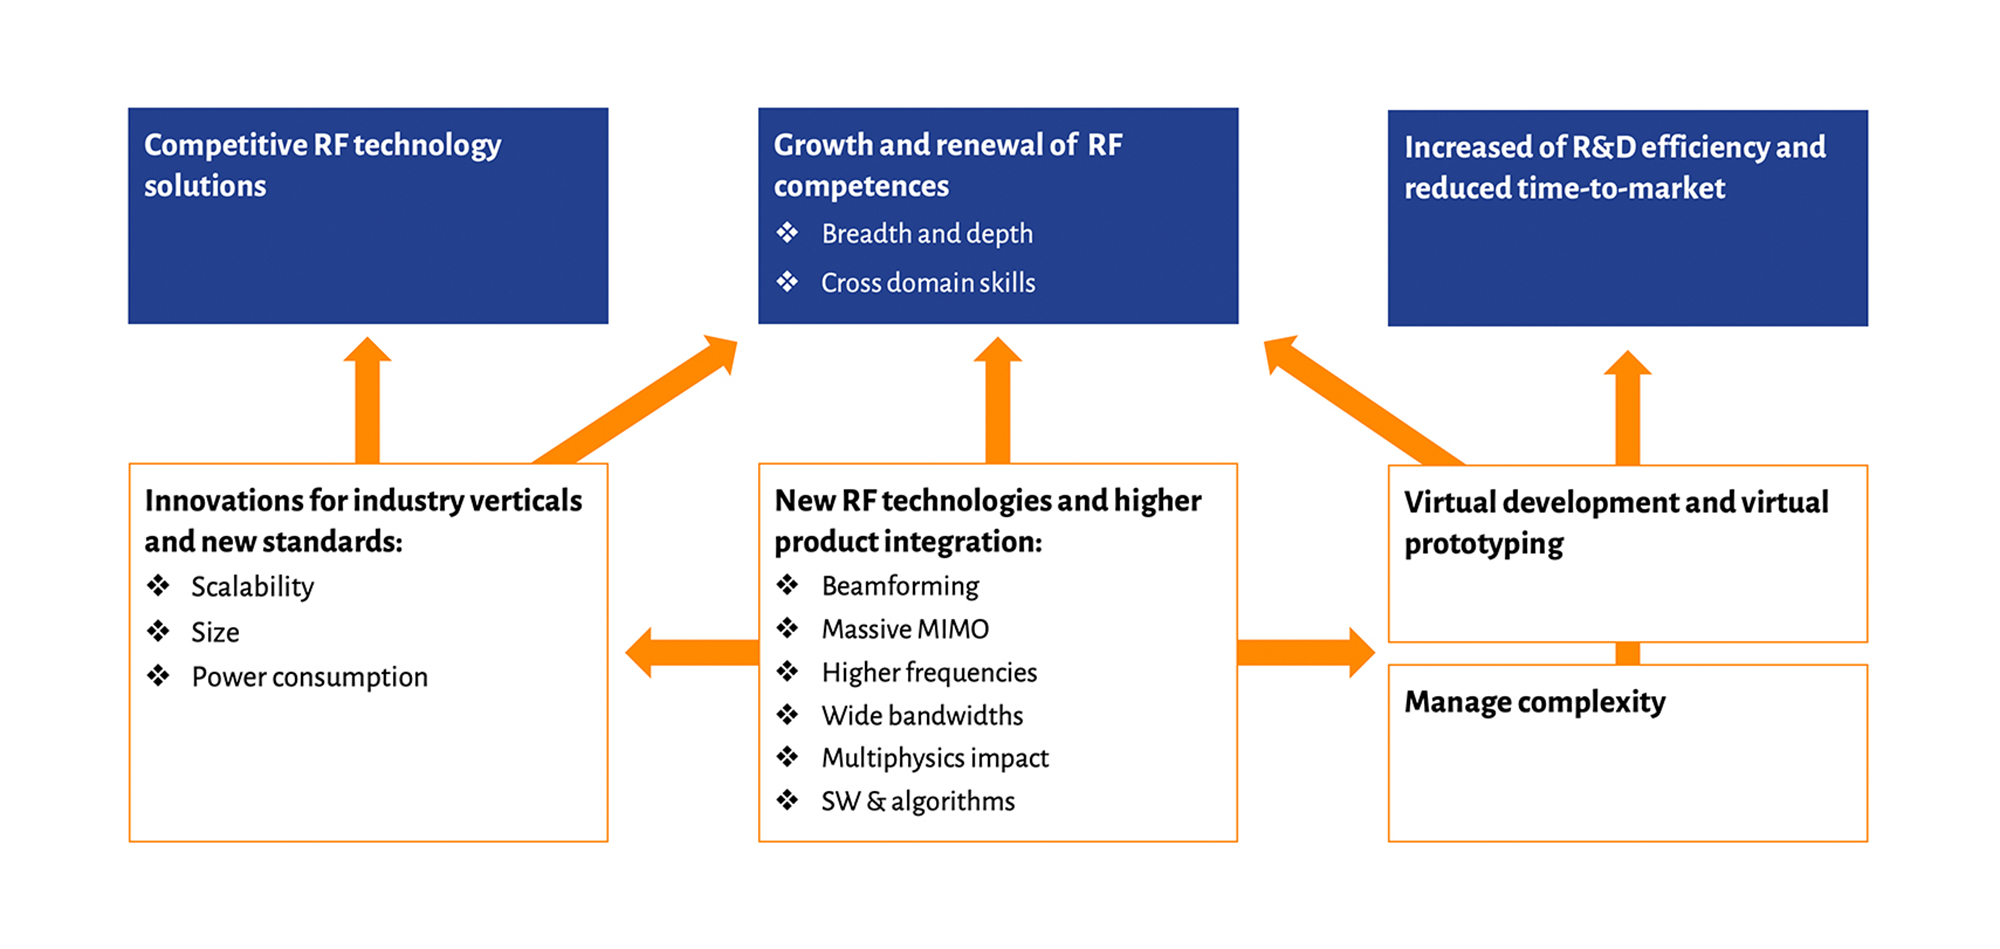 RF ecosystem impact to key success factors for competitiveness and growth